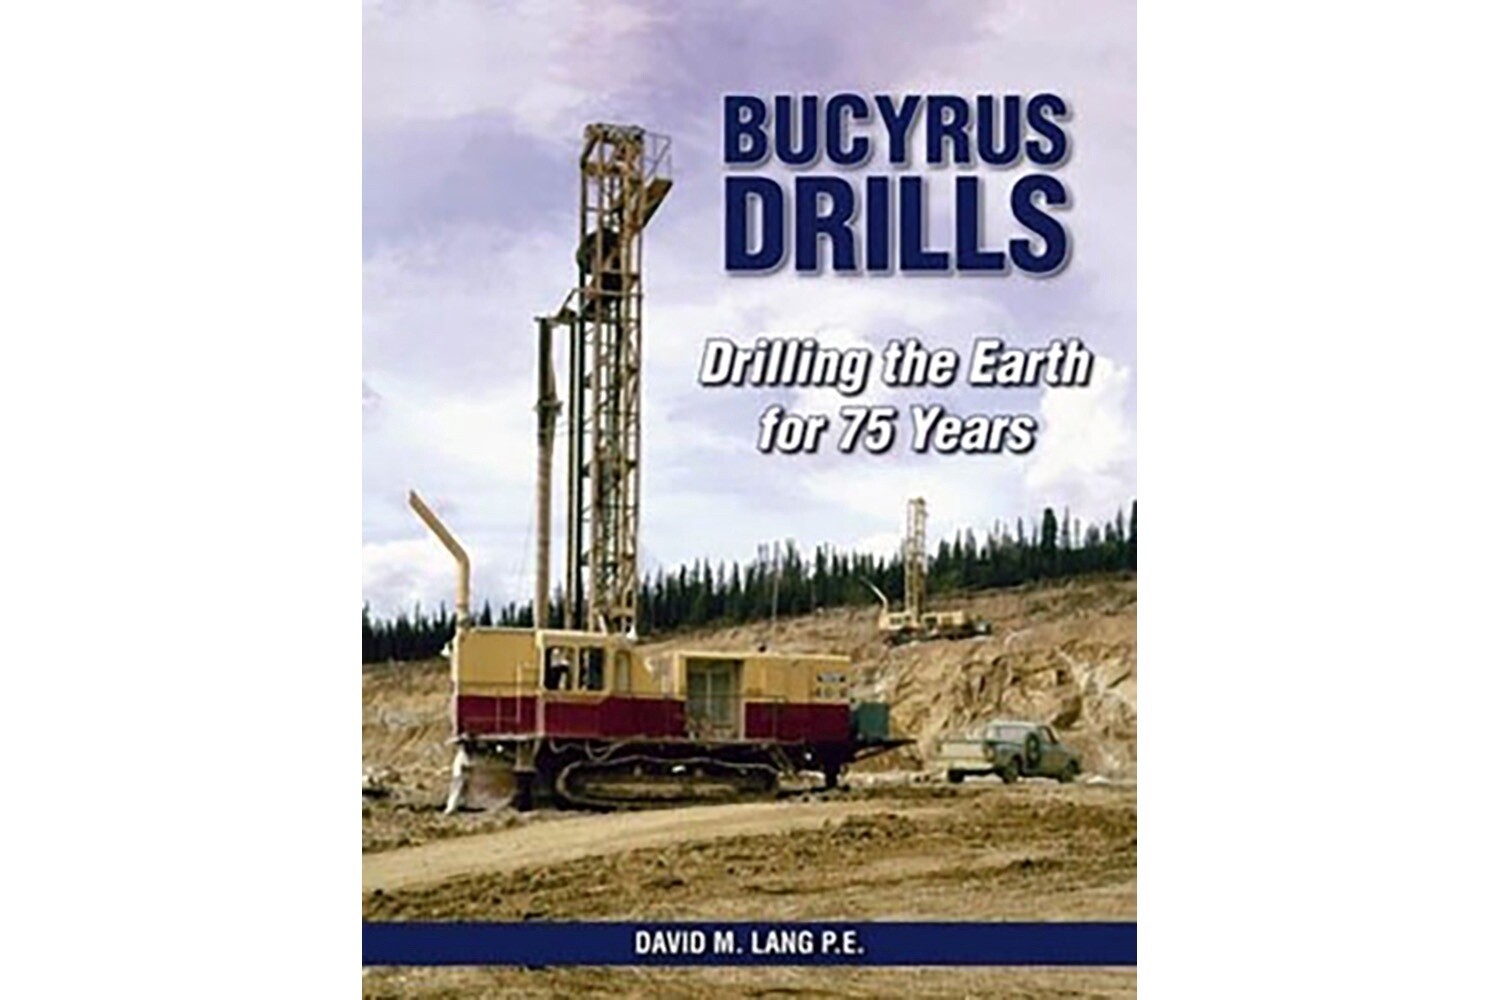 Bucyrus Drills - Drilling the Earth for 75 Years